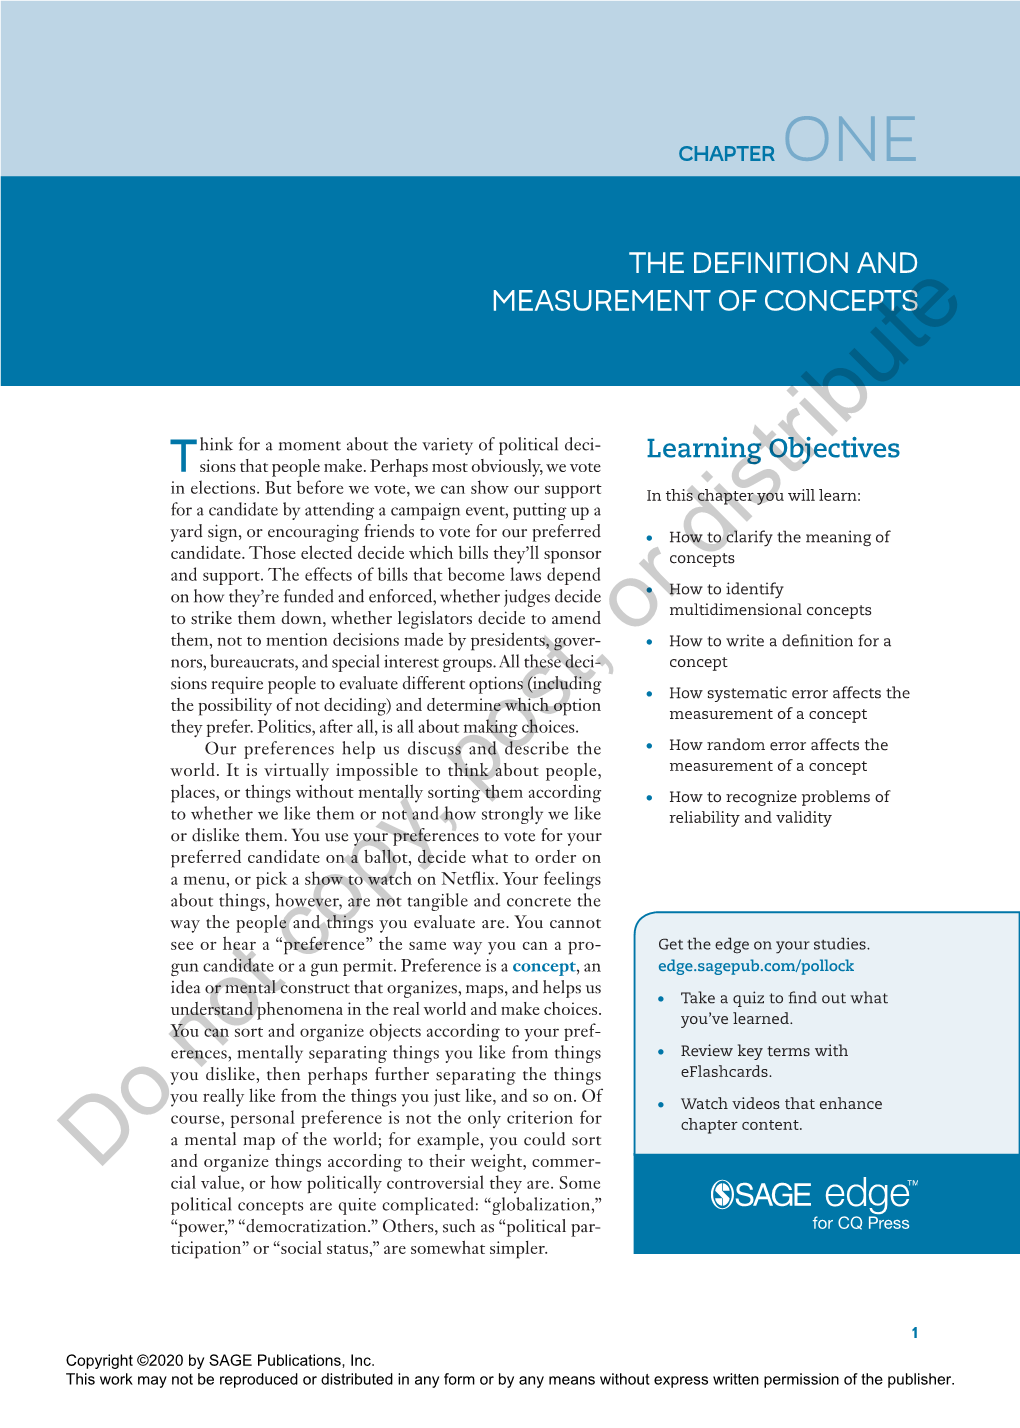 The Definition and Measurement of Concepts